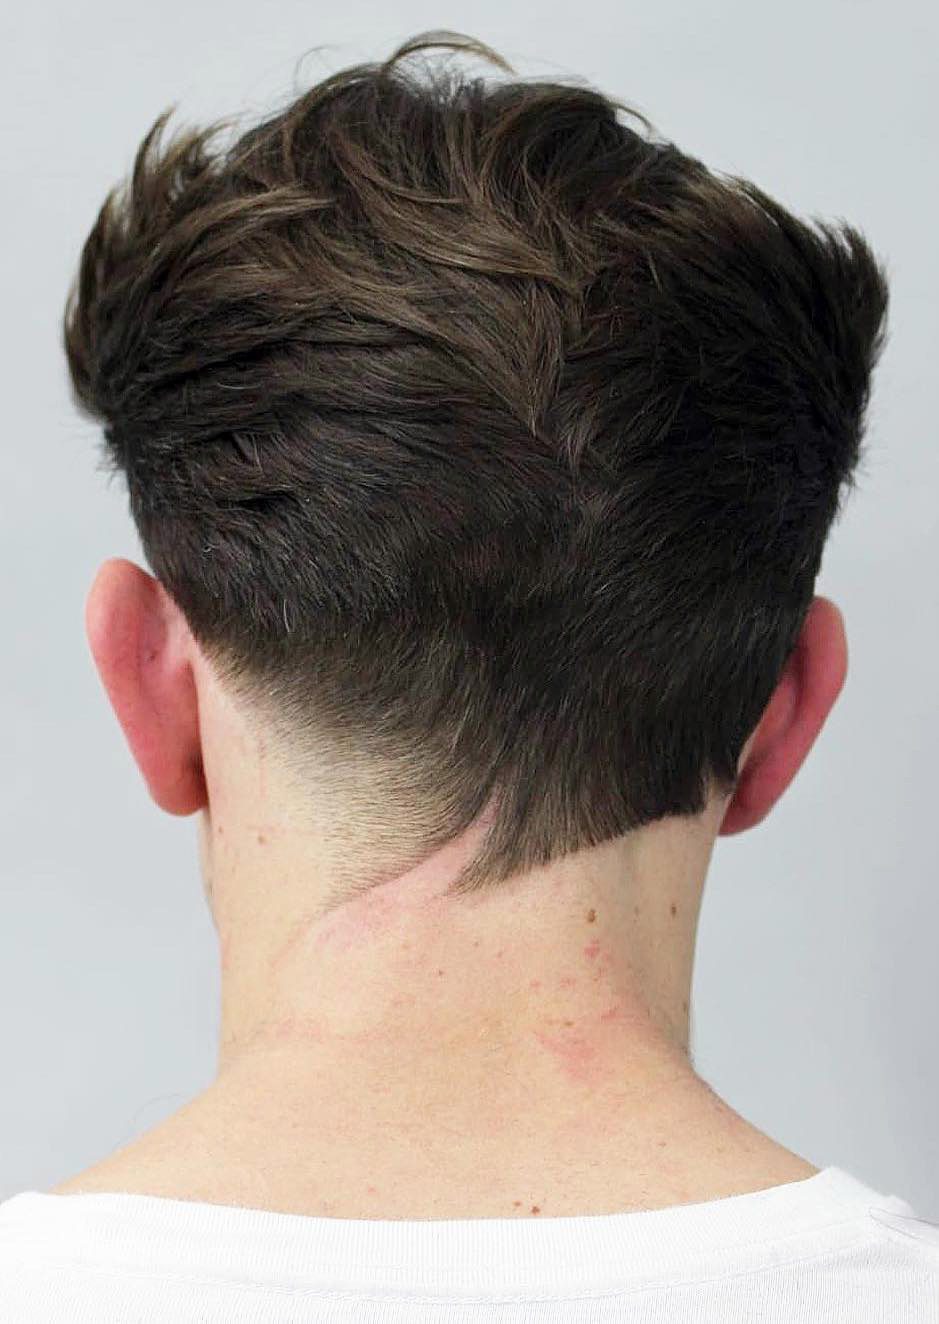 39 Cool VShaped Neckline Haircuts For Men in 2023